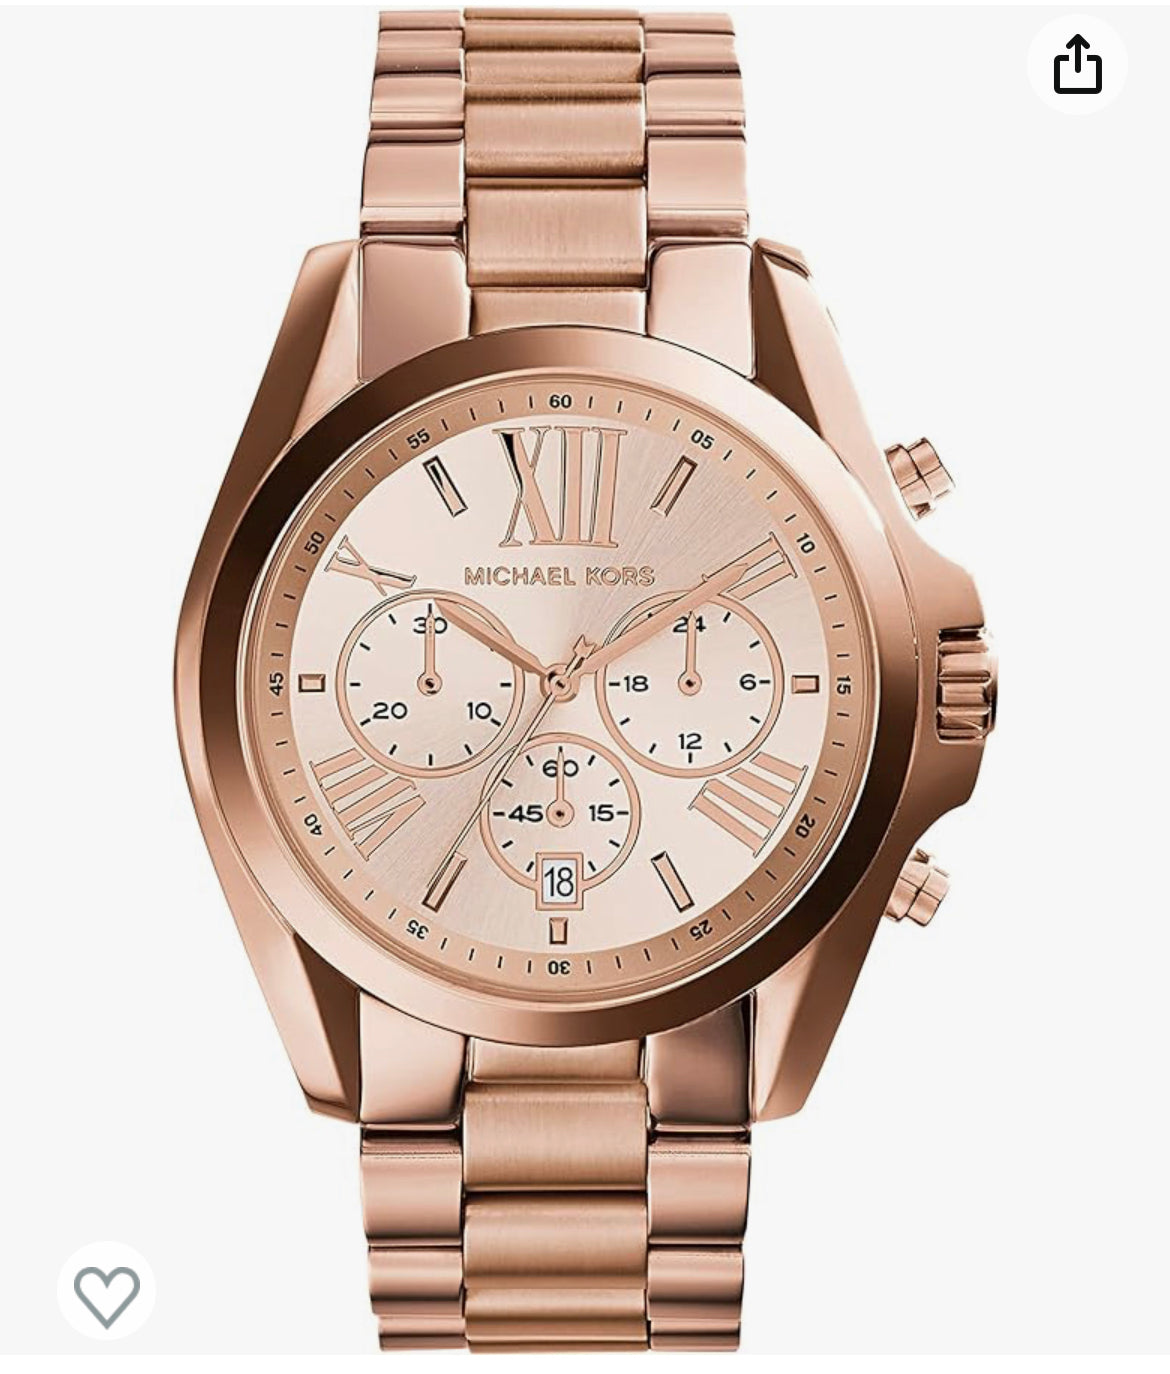 Michael Kors Bradshaw Women's Watch, Stainless Steel Rose Gold Chronograph Watch for Women with Steel